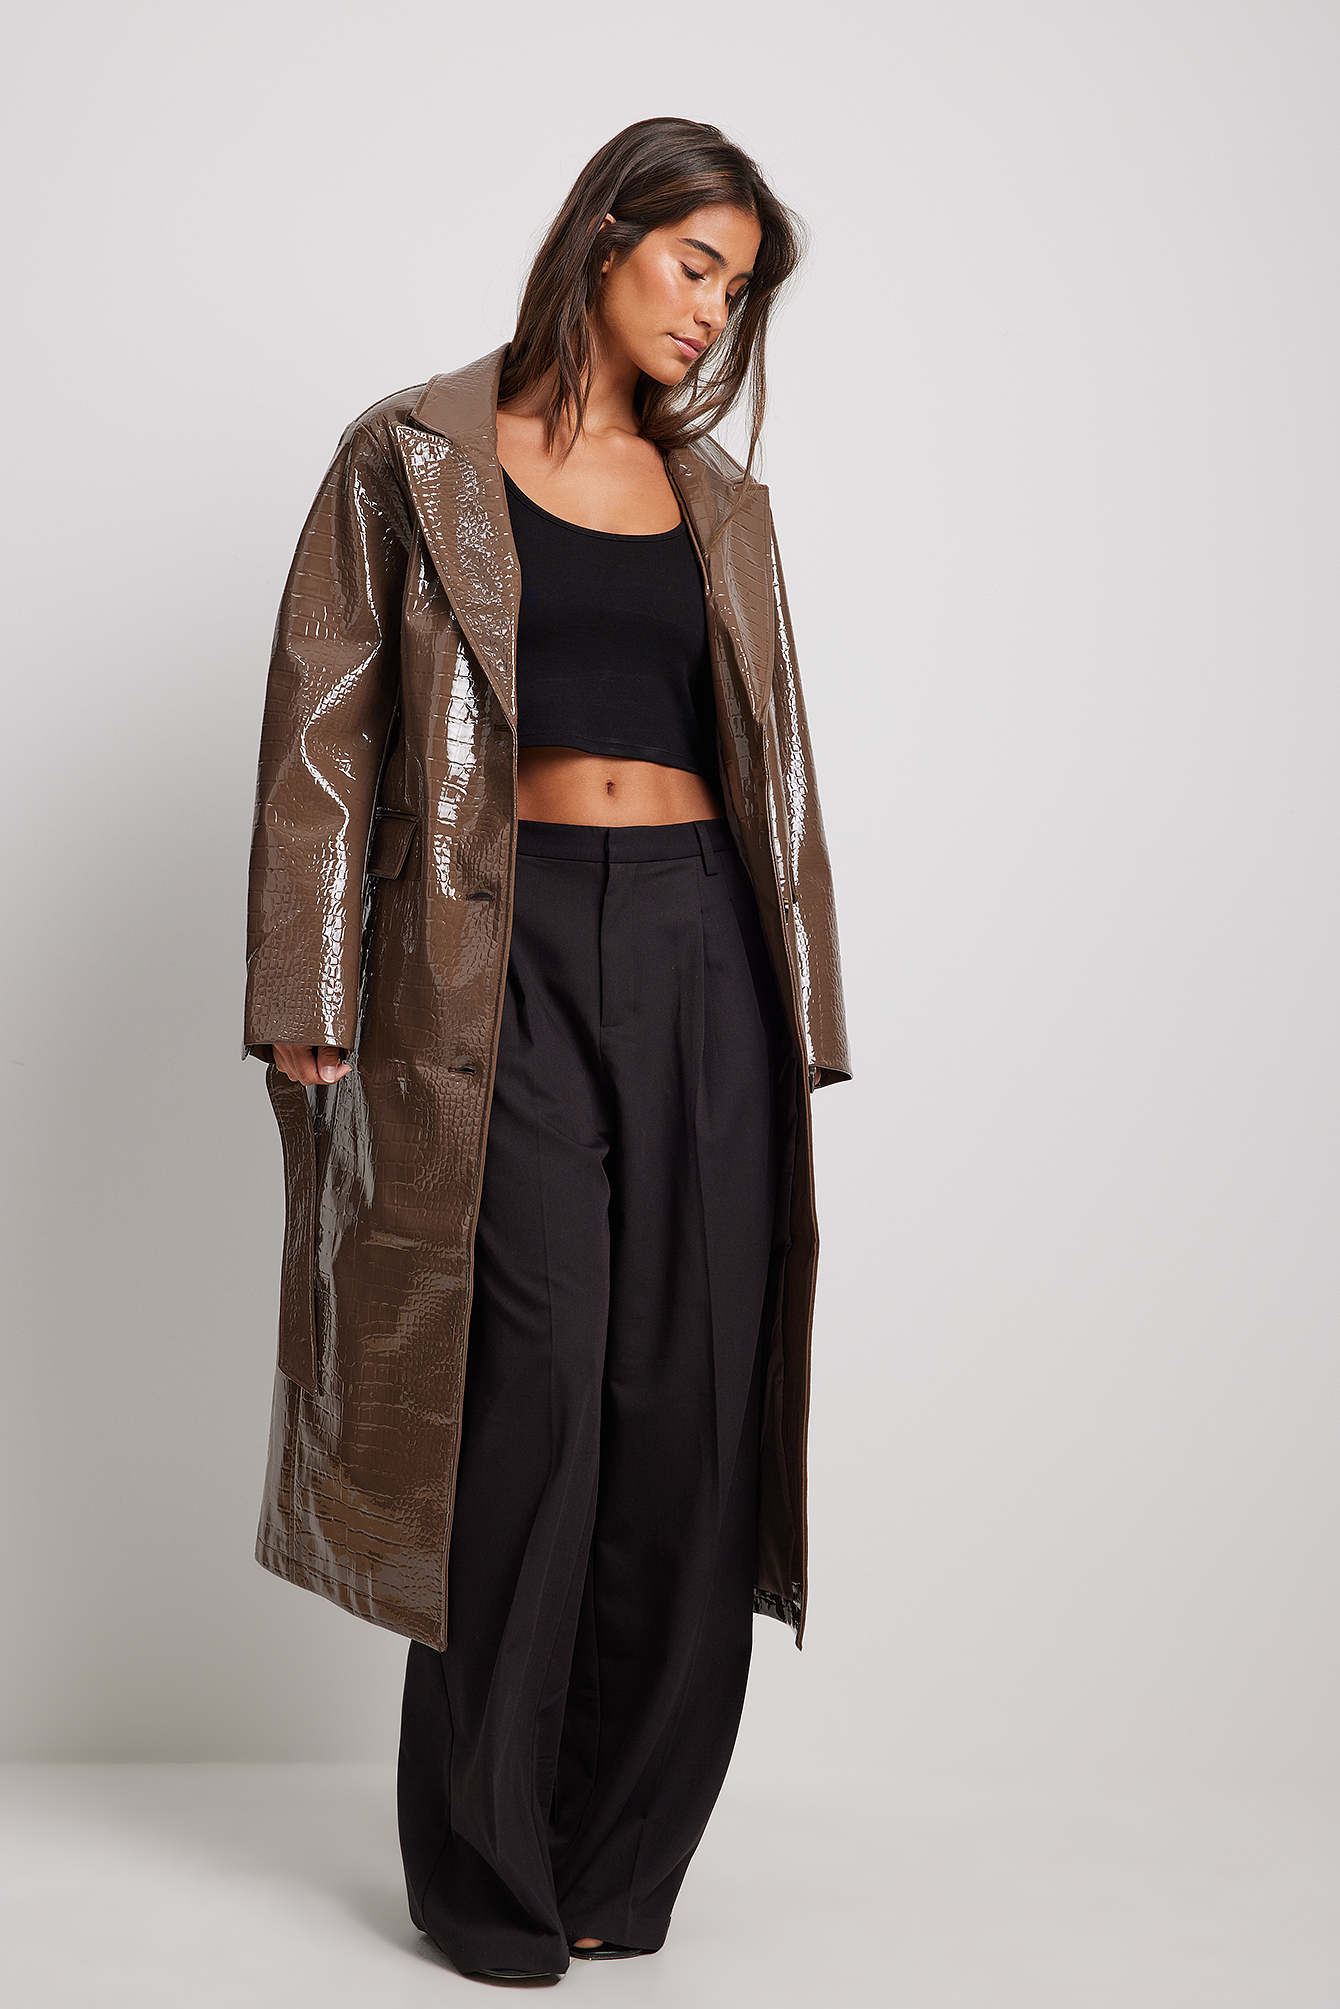 Belted Croco Pu Coat Outfit